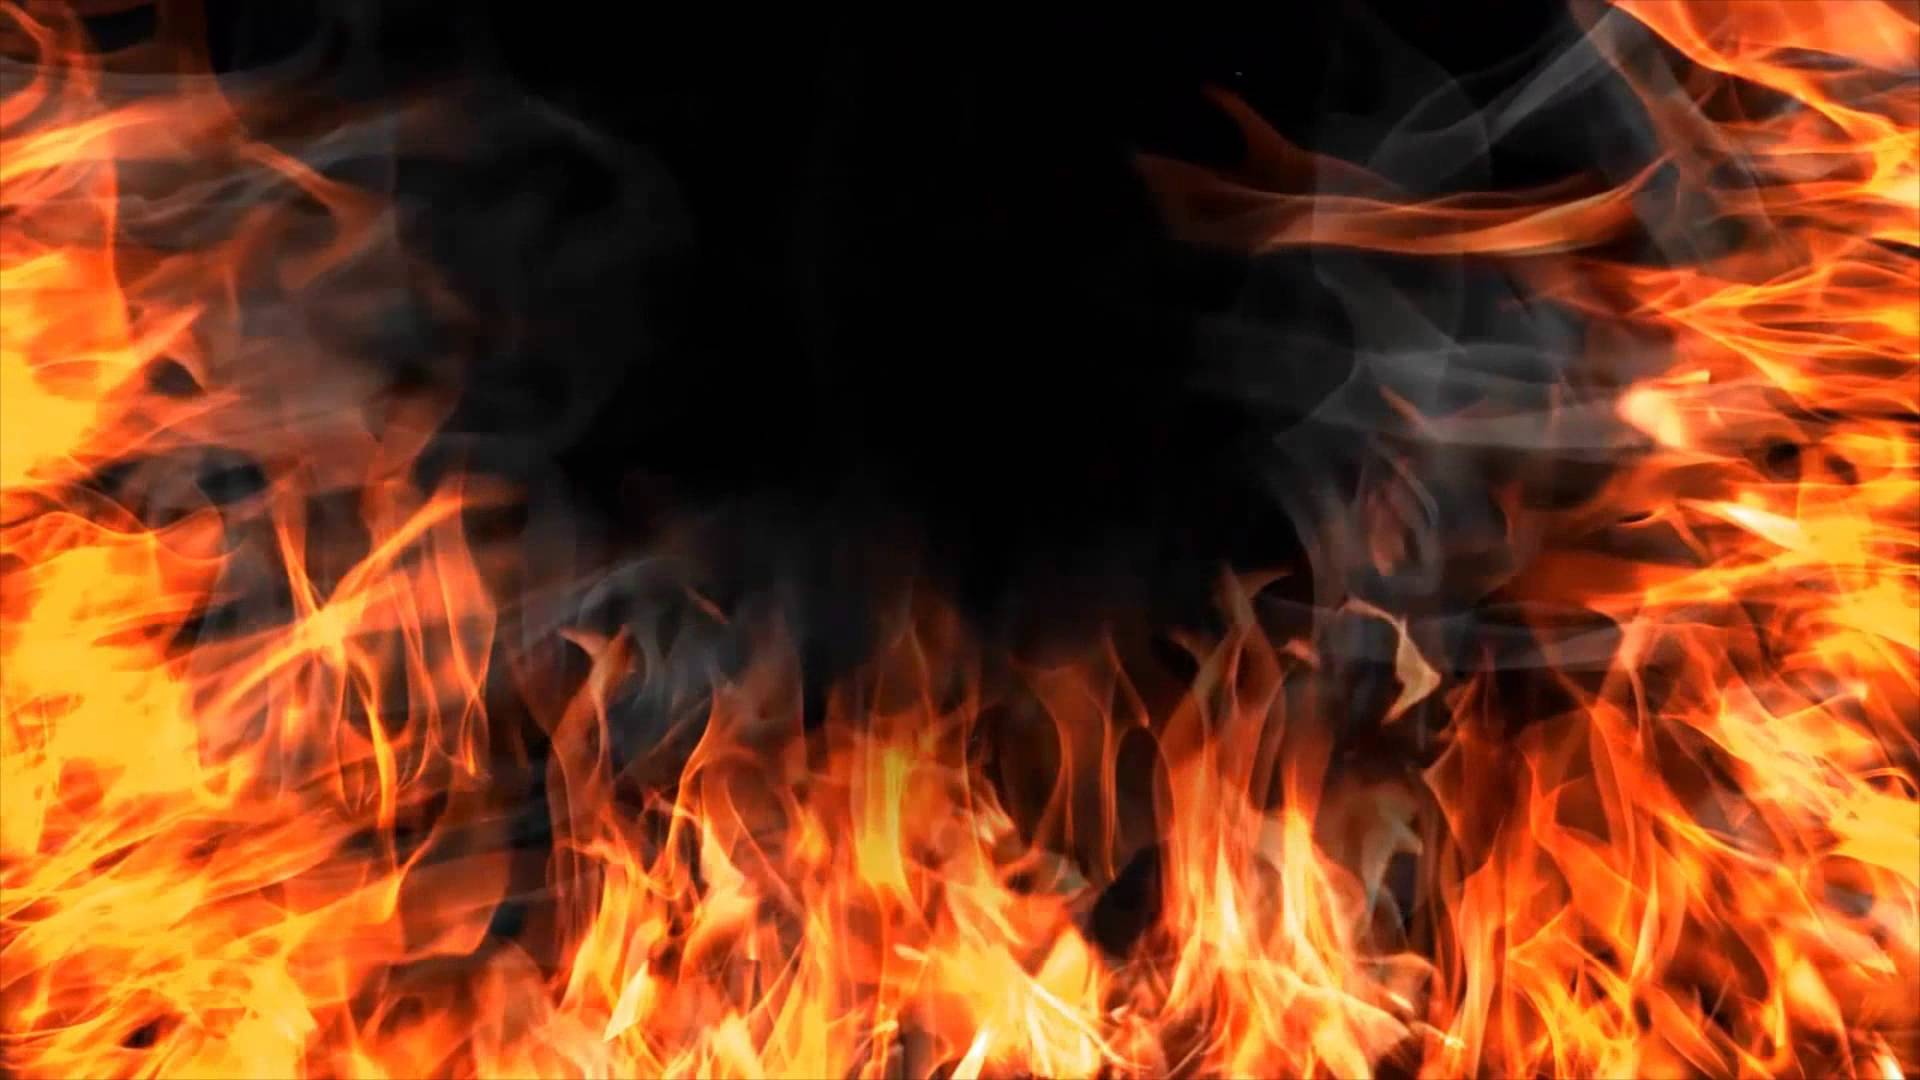 Fire Images For Backgrounds - Wallpaper Cave